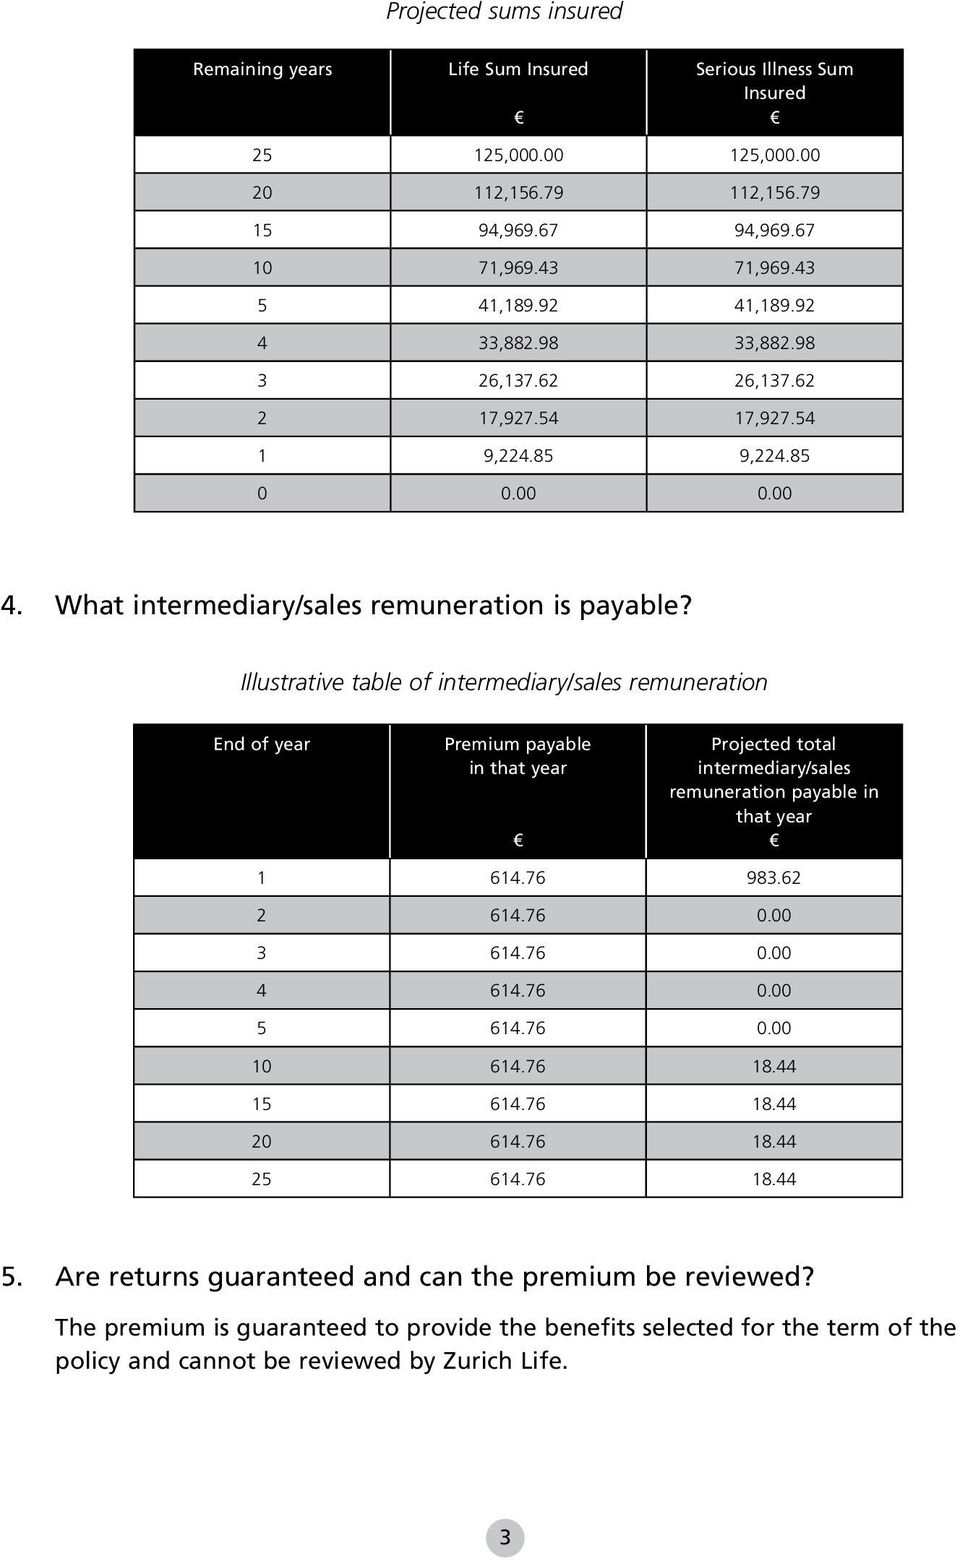 Illustrative table of intermediary/sales remuneration End of year Premium payable in that year Projected total intermediary/sales remuneration payable in that year 1 614.76 983.62 2 614.76 0.00 3 614.